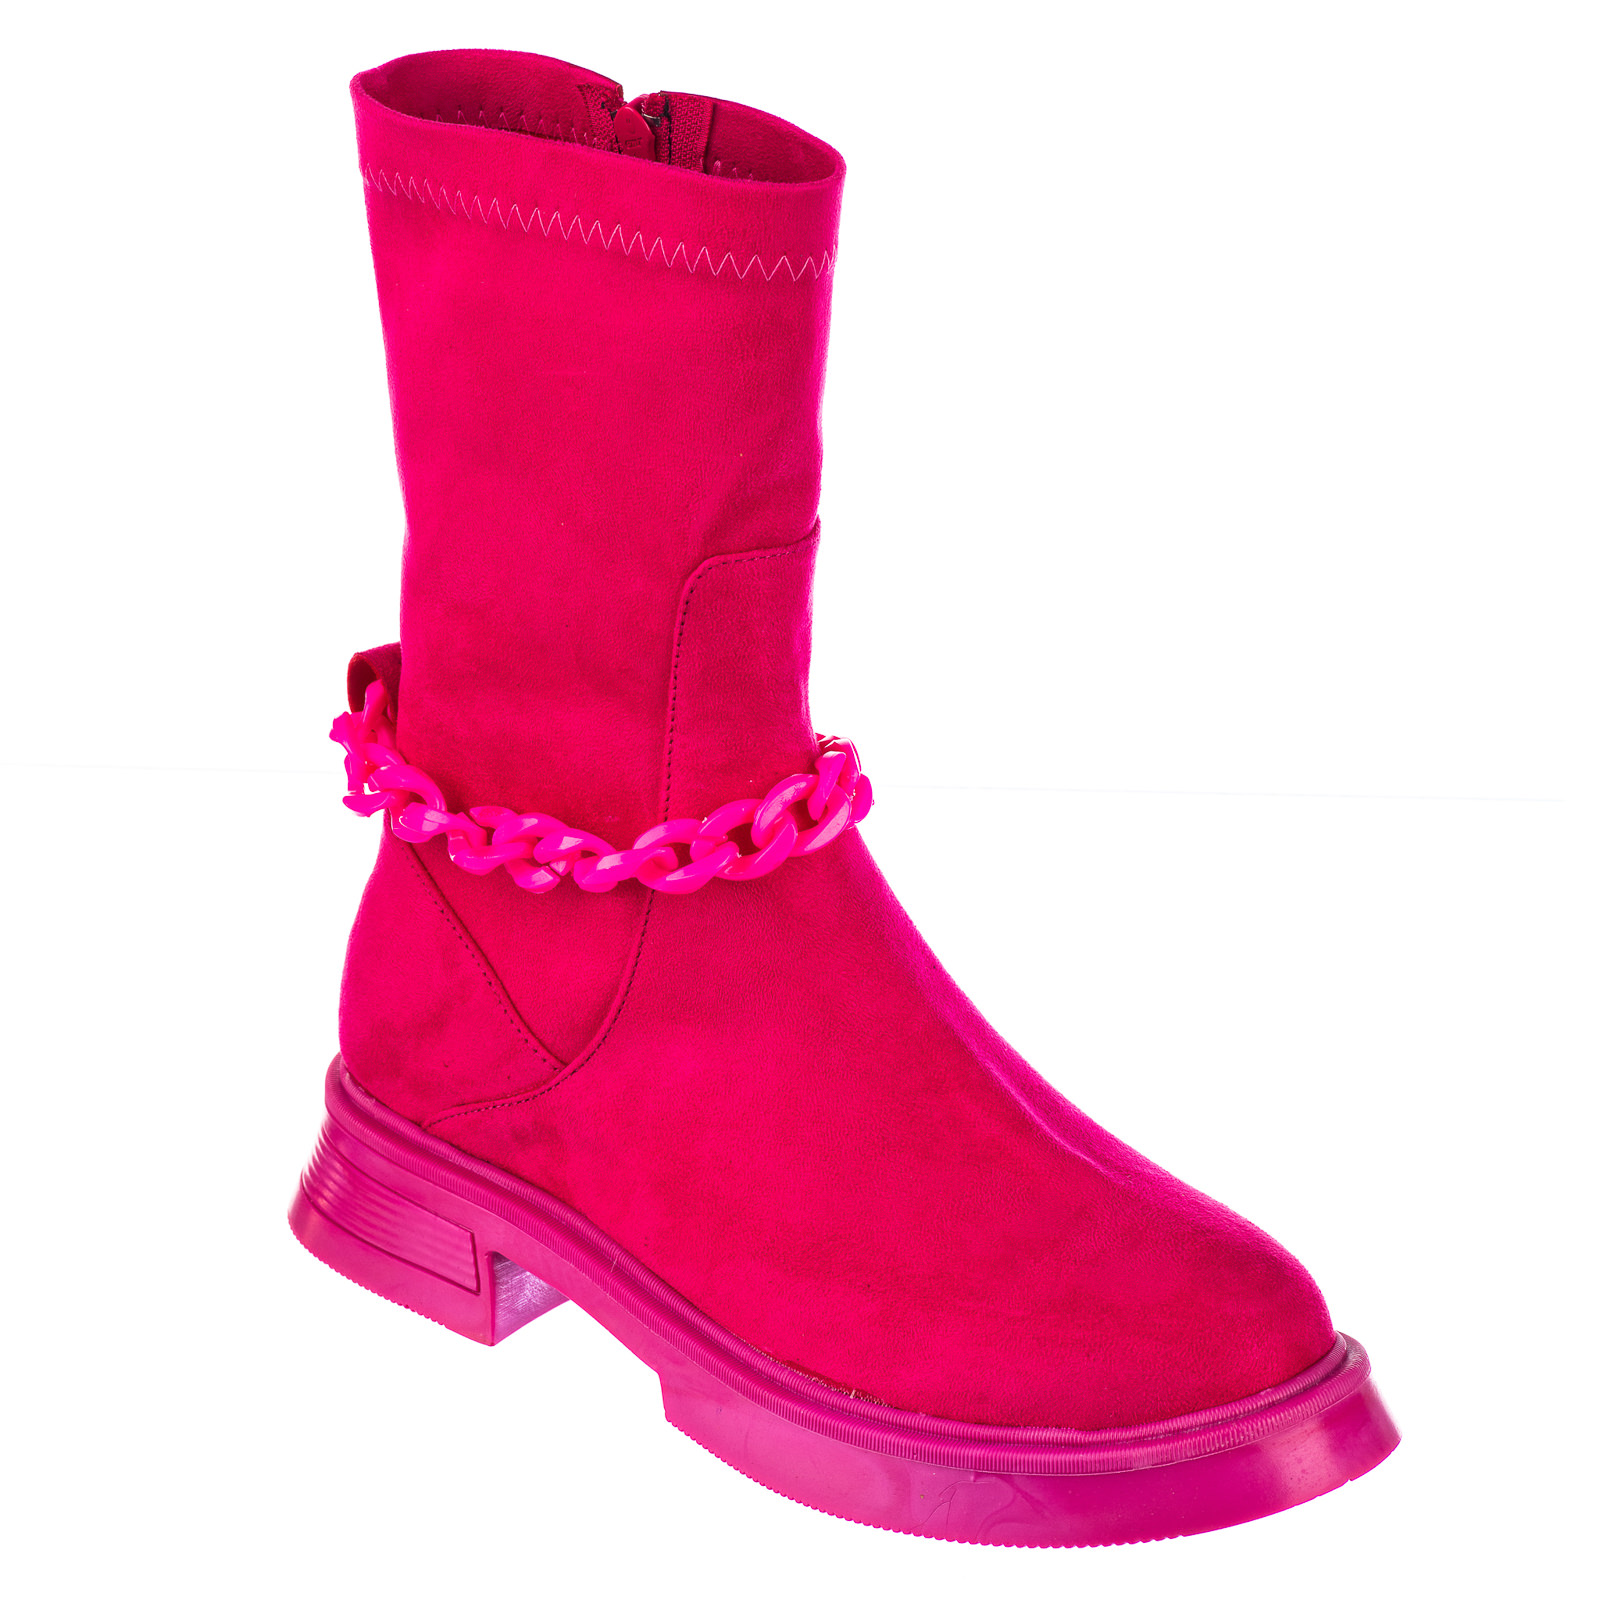 Women ankle boots B718 - PINK